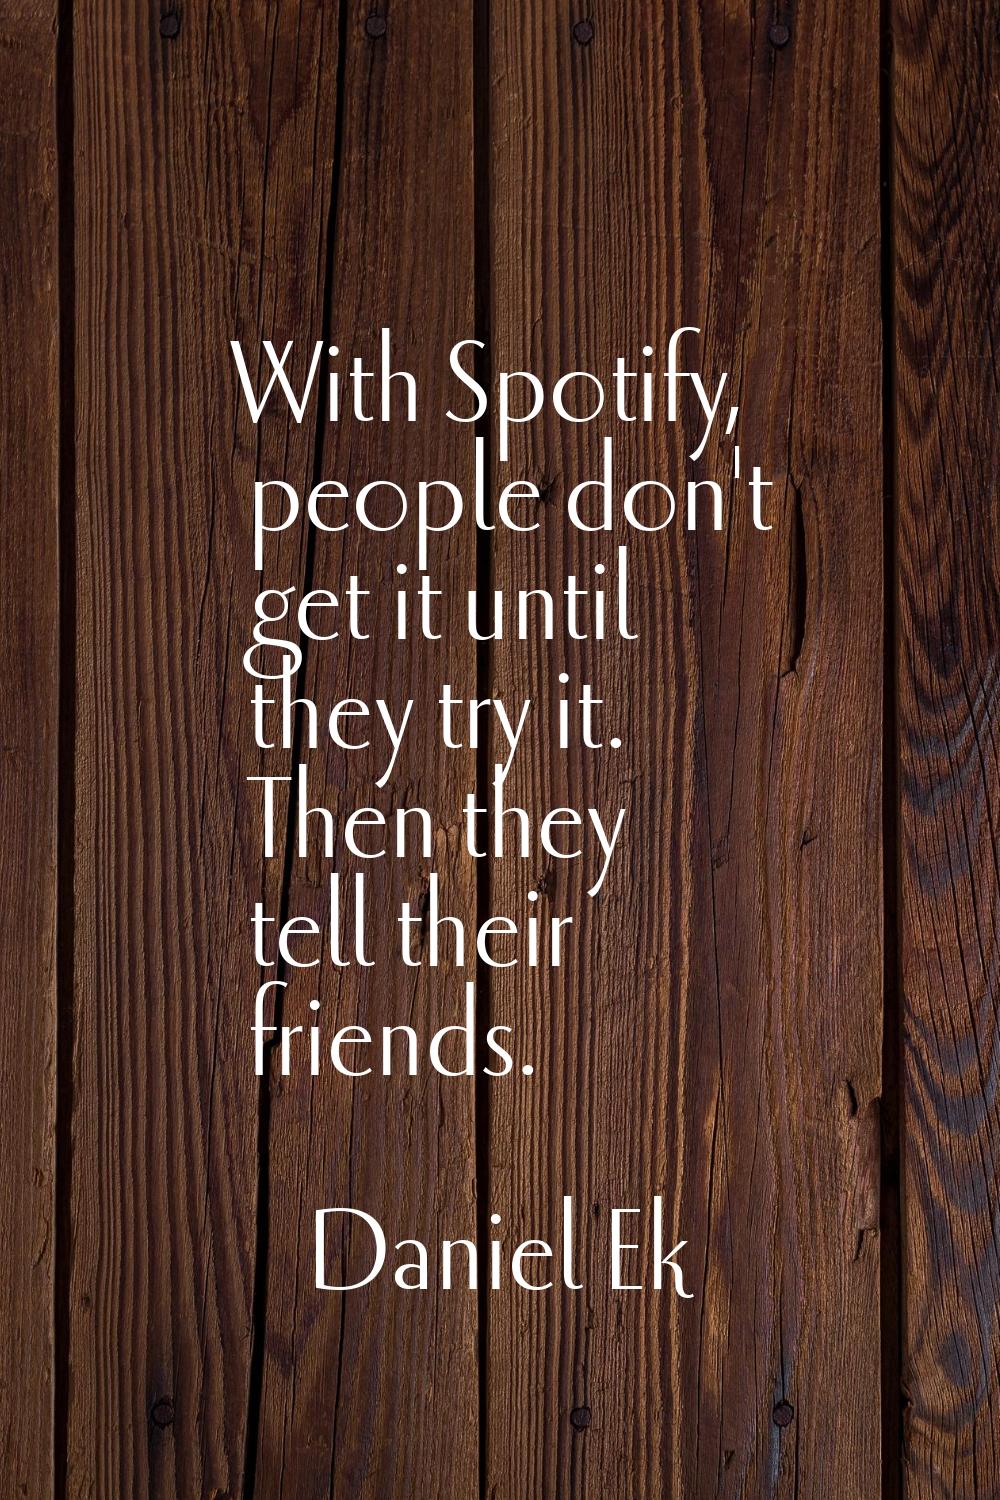 With Spotify, people don't get it until they try it. Then they tell their friends.